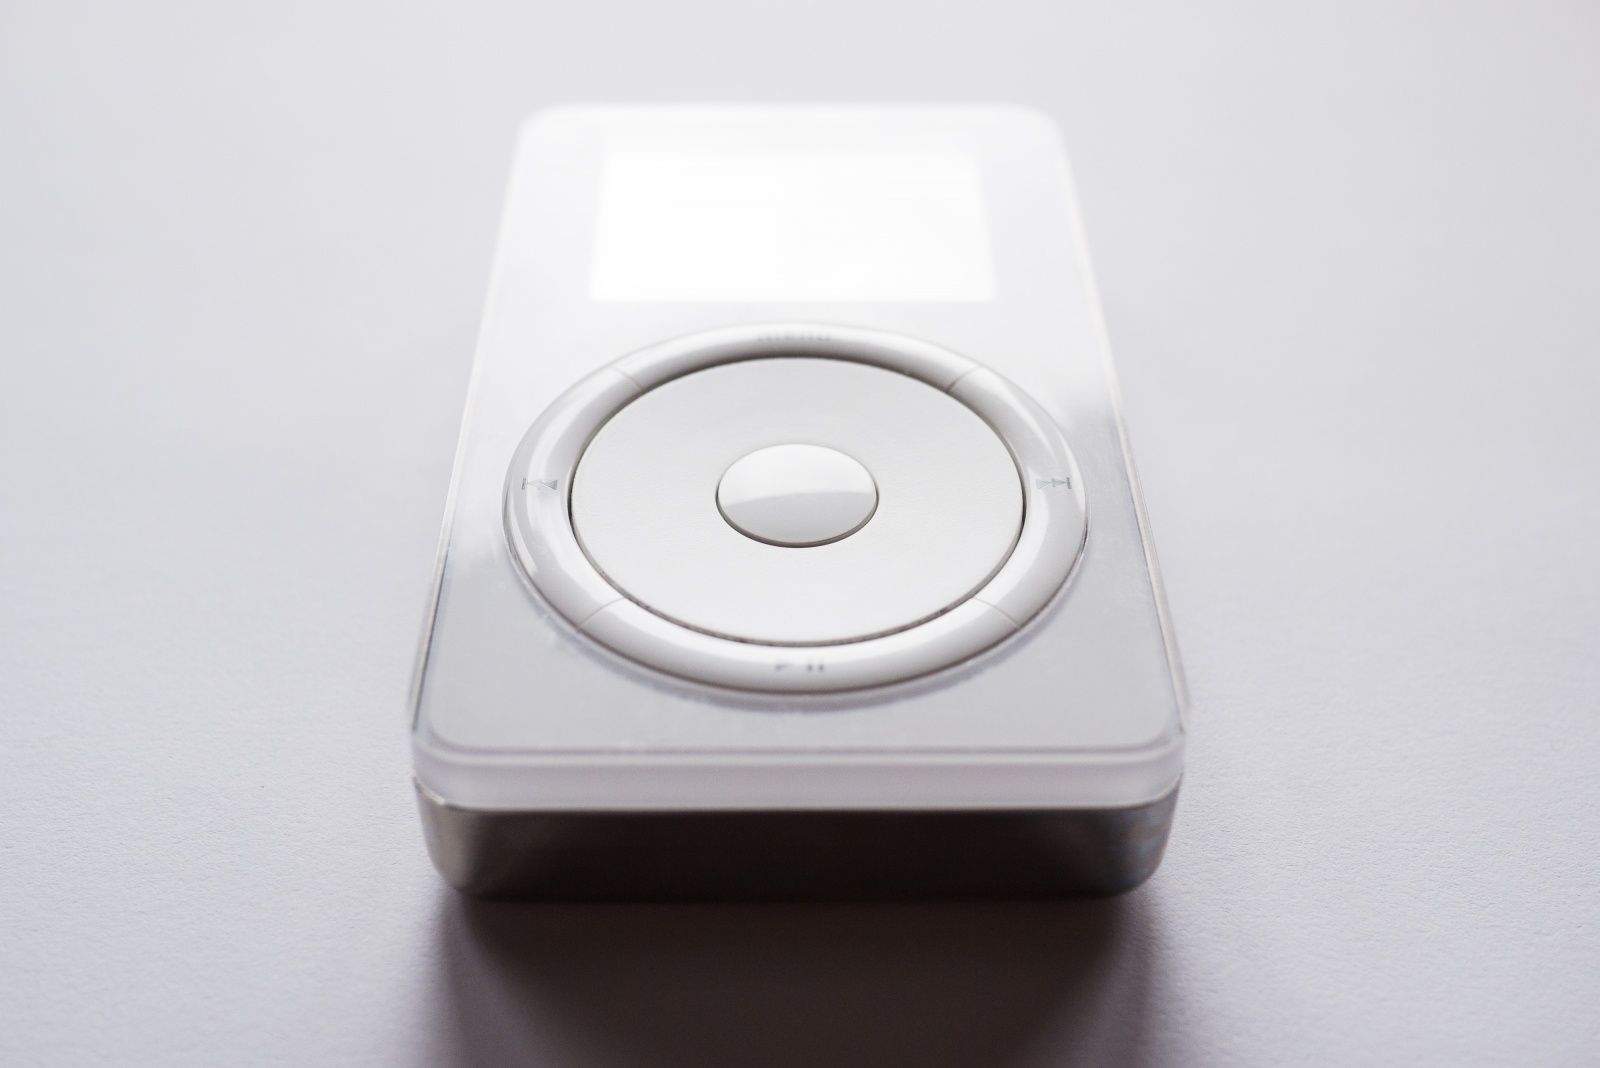 The first iPod. Steve Jobs drowned this. Photo: Grant Hutchison / Flickr (CC)